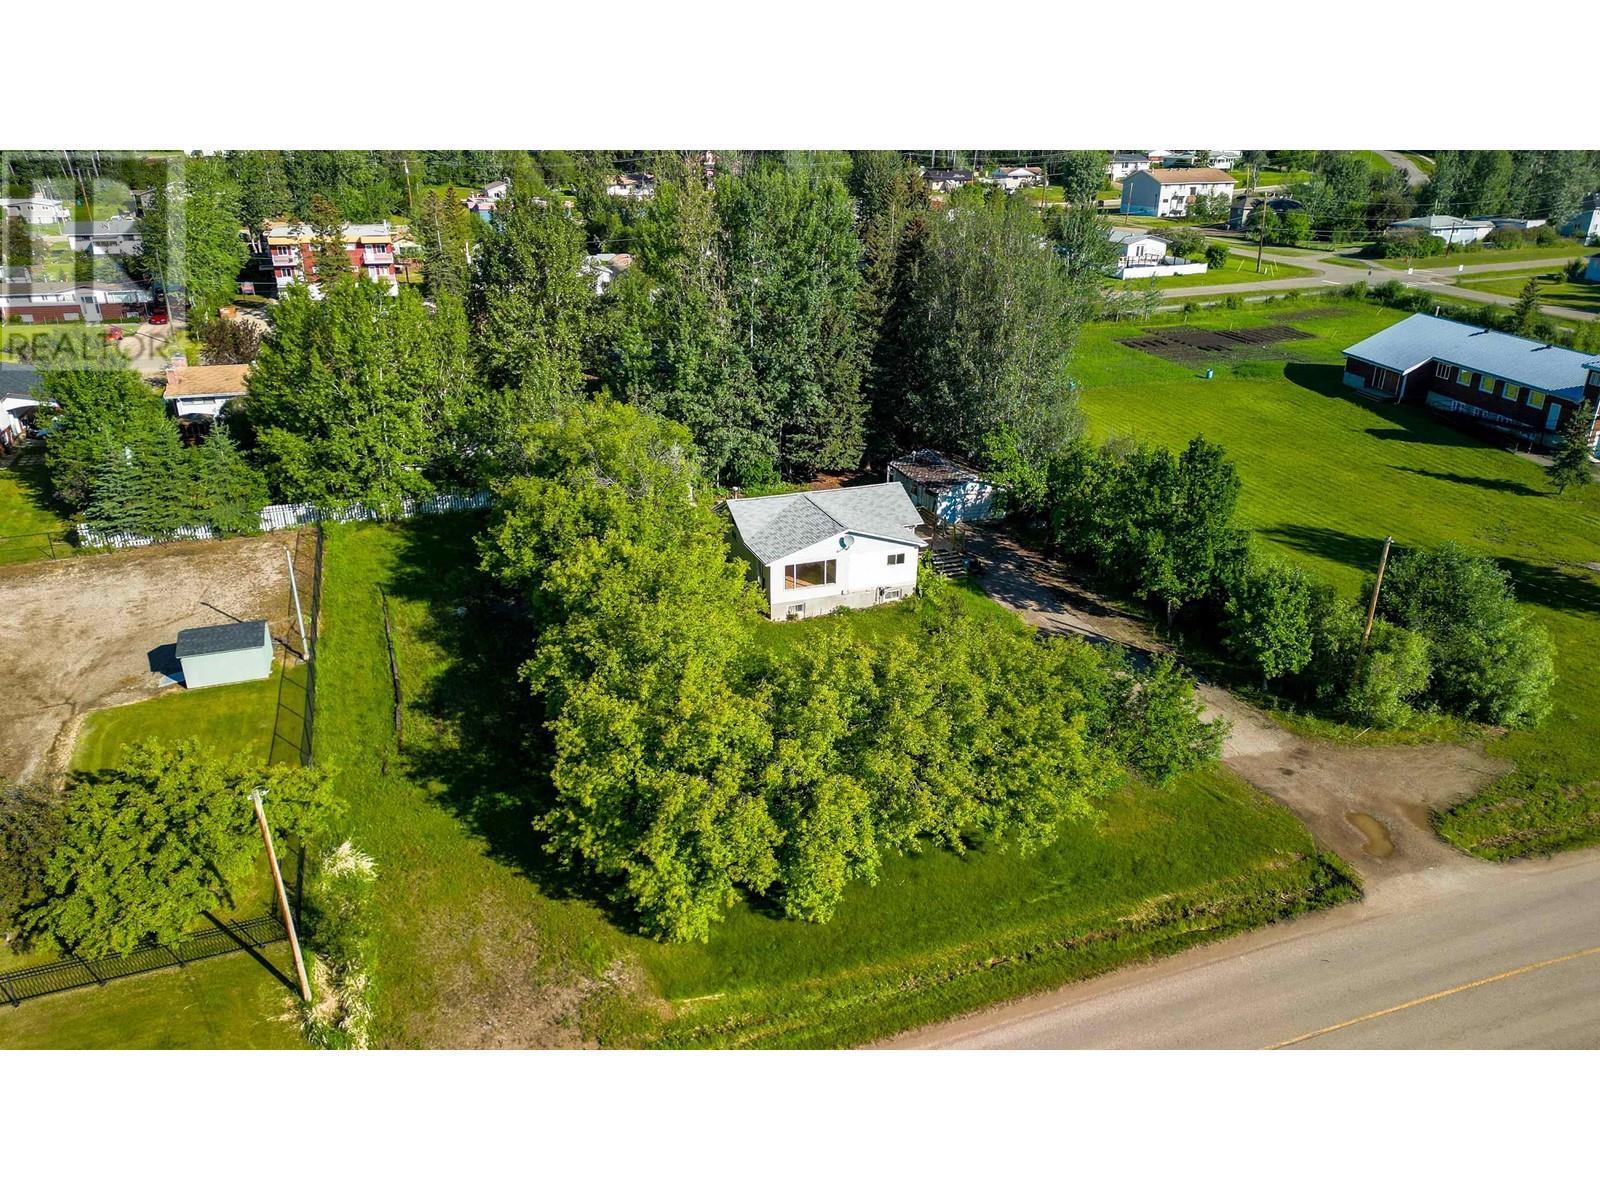 












5307 AIRPORT DRIVE

,
Fort Nelson,




British Columbia
V0C1R0

